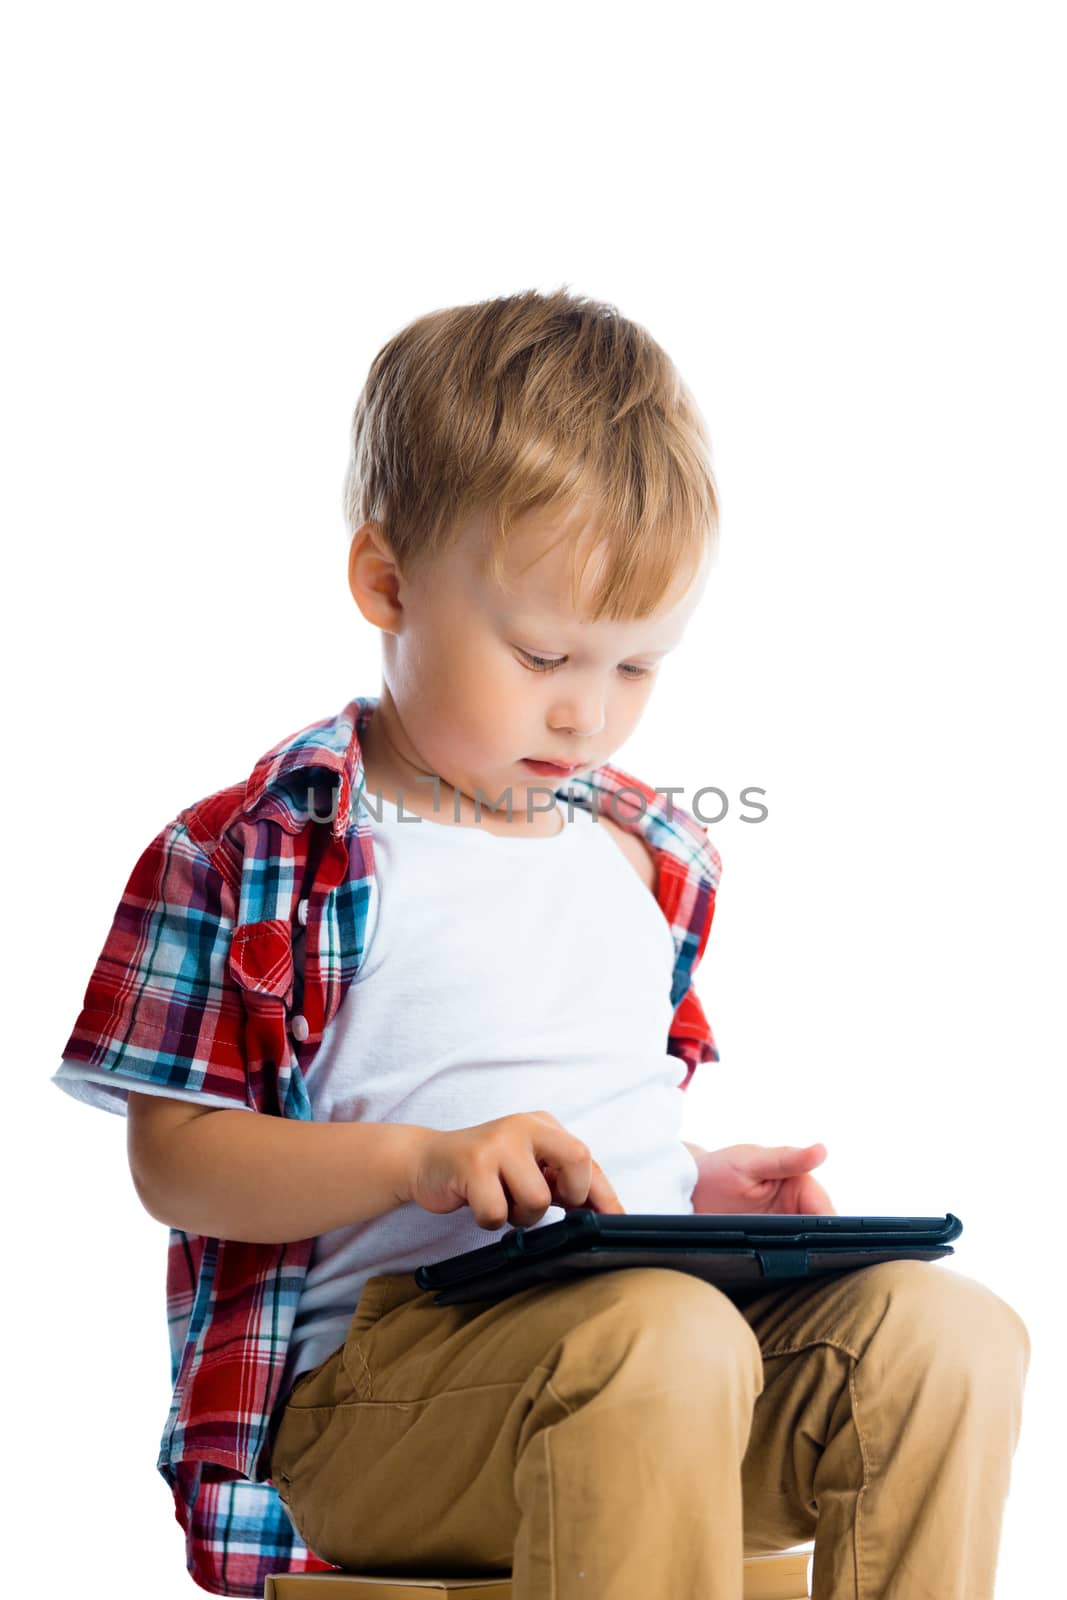 boy in a plaid shirt with a tablet computer by pzRomashka